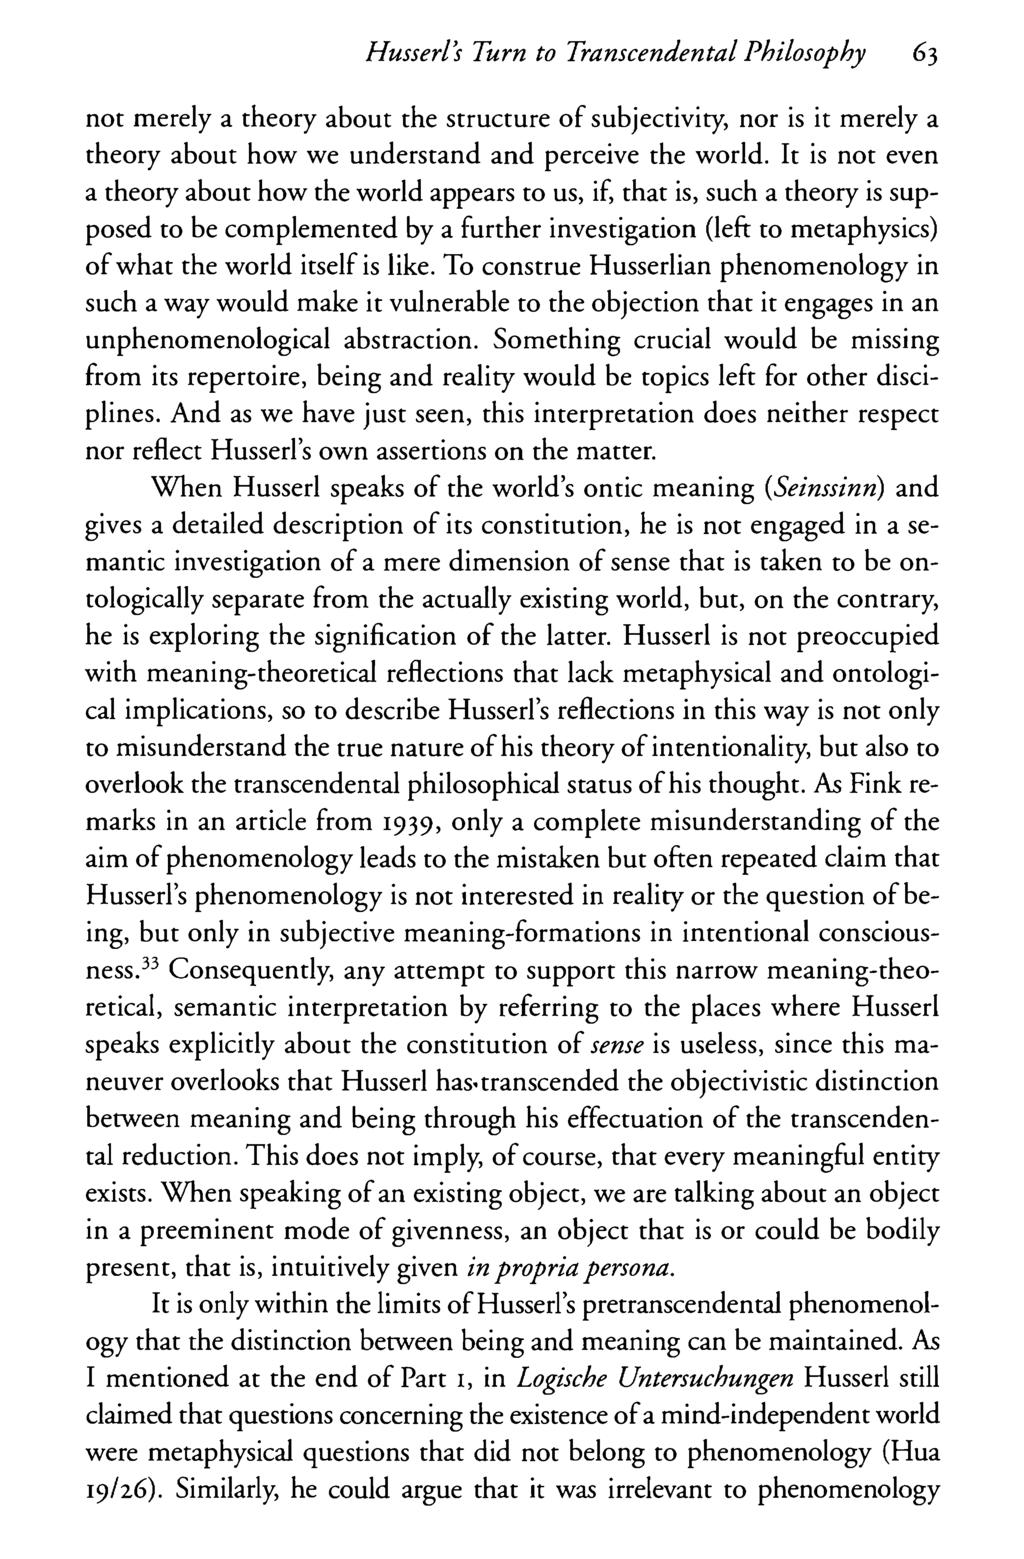 Husserls Turn to Transcendental Philosophy 63 not merely a theory about the structure of subjectivity, nor is it merely a theory about how we understand and perceive the world.